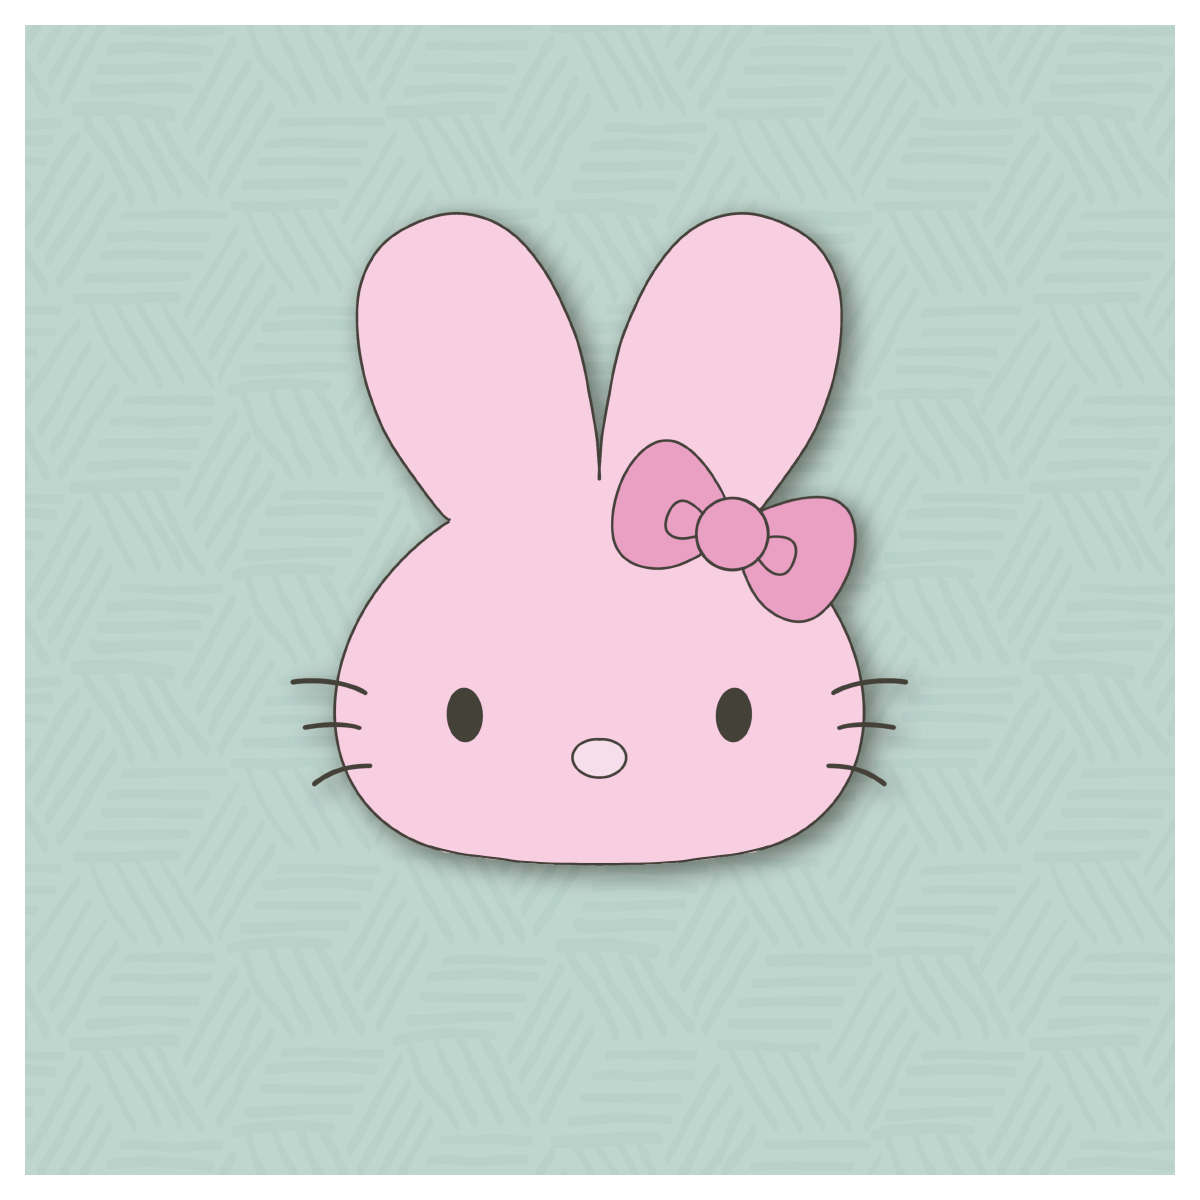 Kitty Mallow Bunny Face Cookie Cutter